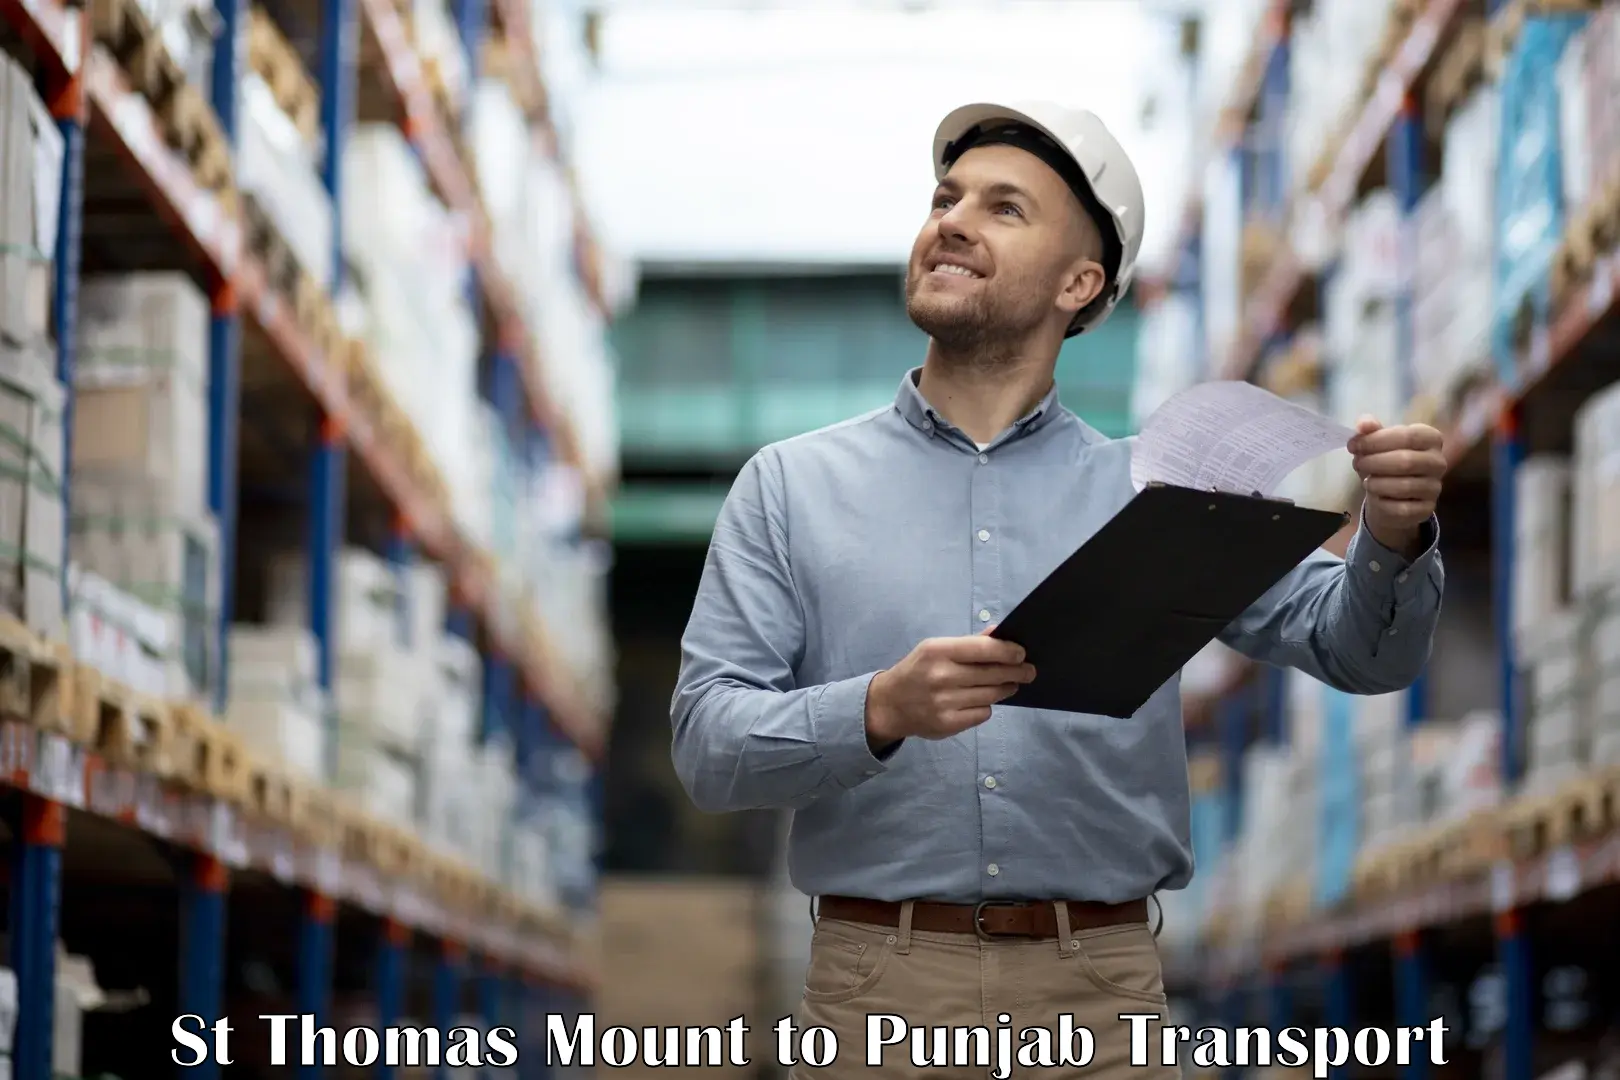 Commercial transport service St Thomas Mount to Bagha Purana